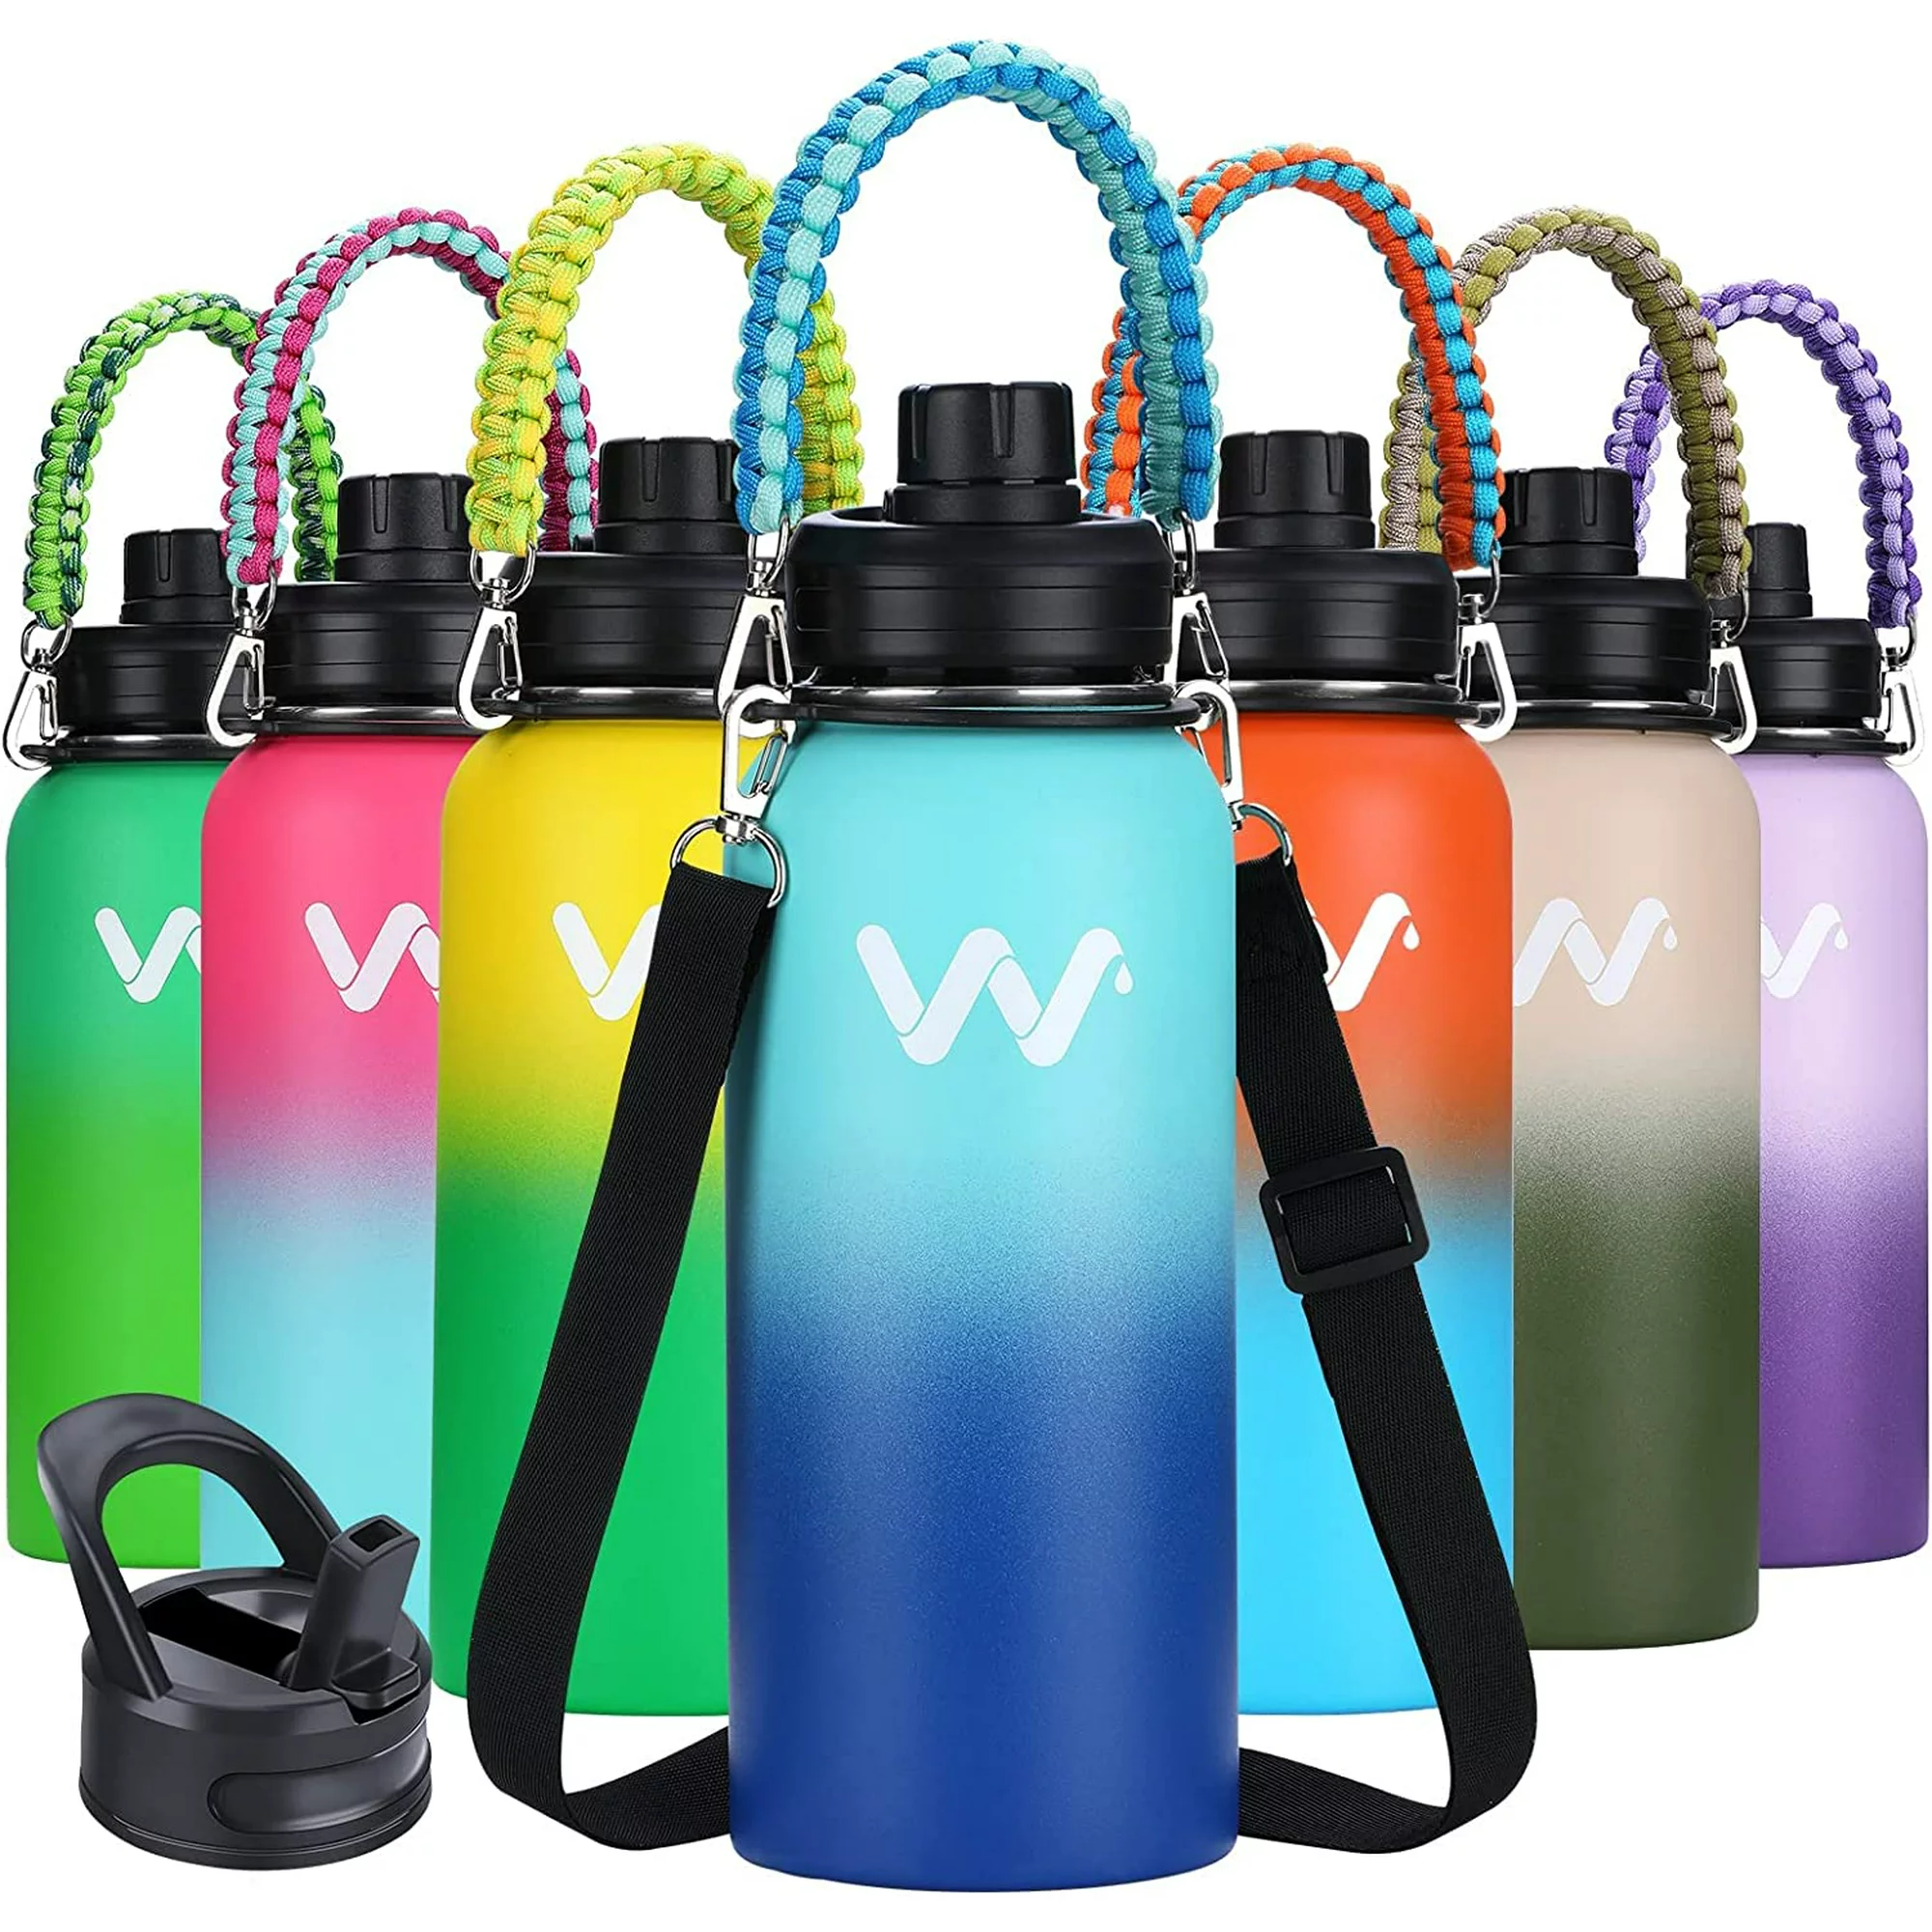 Julian - Insulated 32 oz Water Bottle with Straw Cap